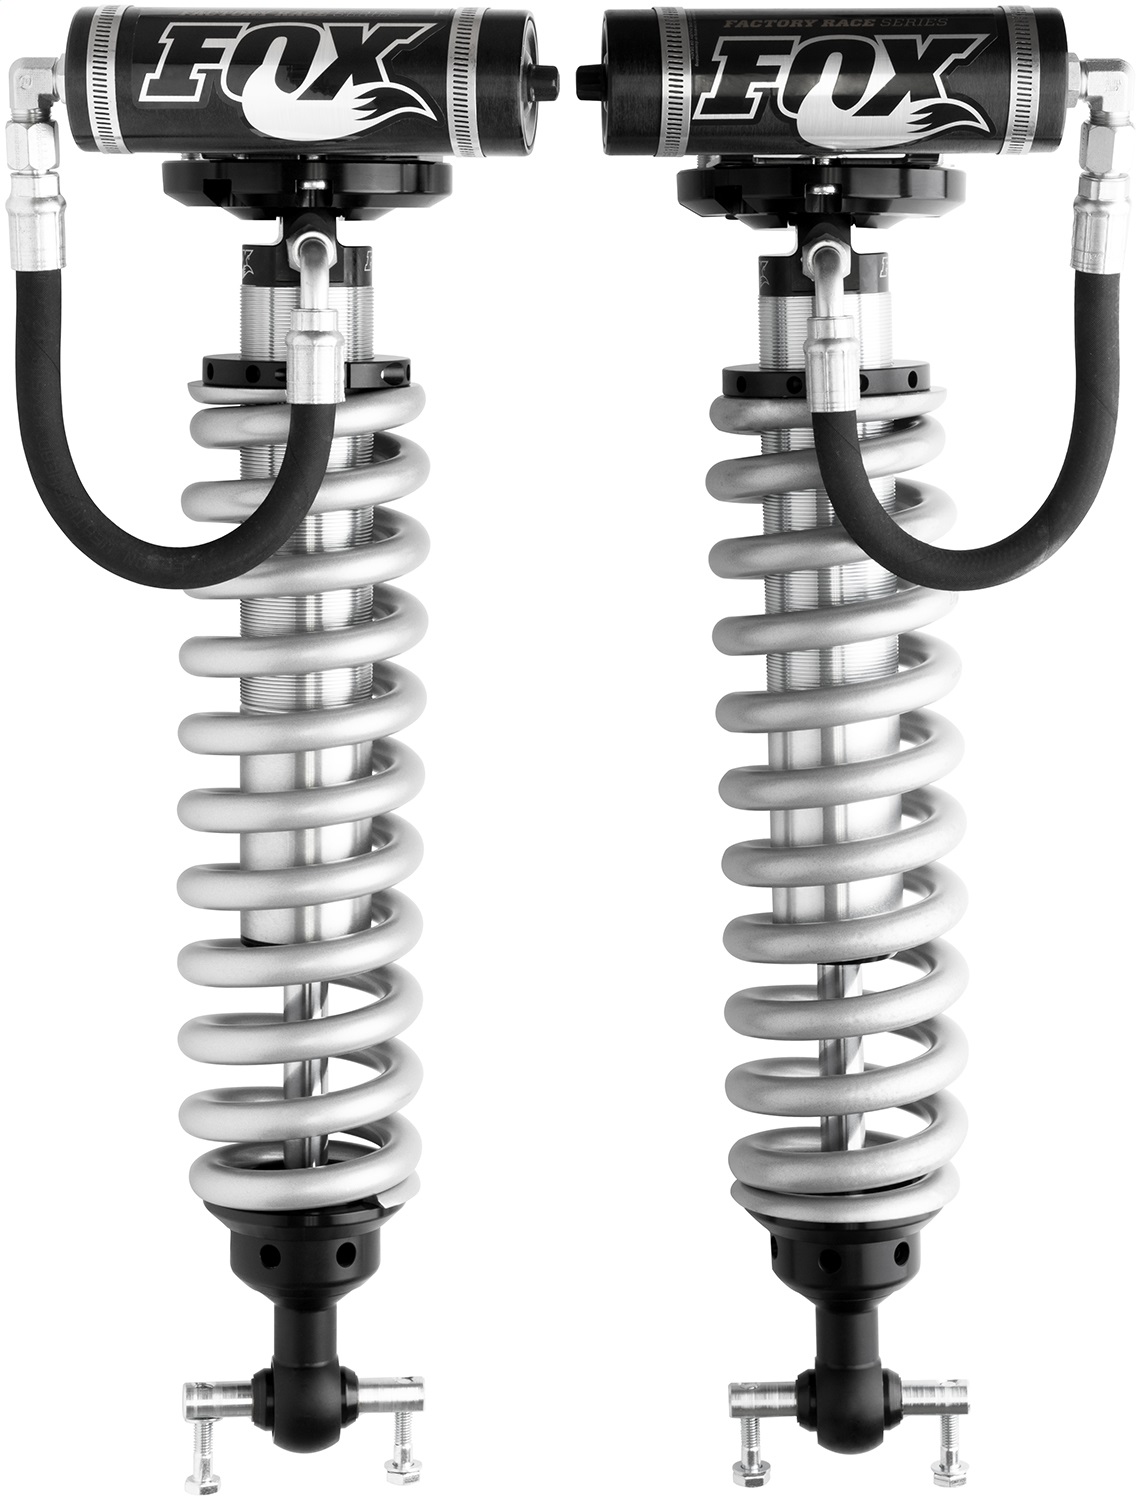 FOX Offroad Shocks 883-02-121 Coil Over Shock Absorber